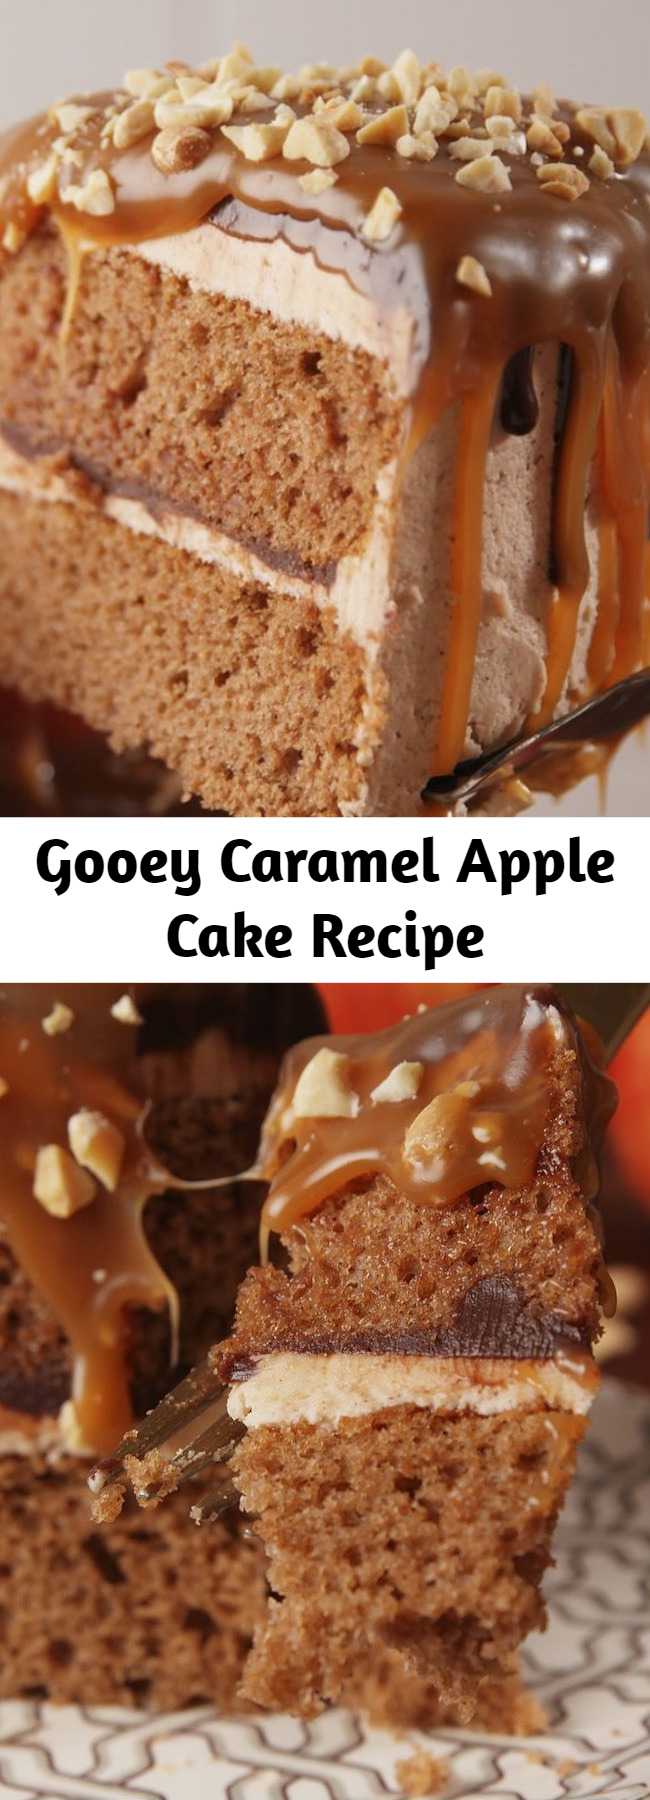 Gooey Caramel Apple Cake Recipe - This is a next level fall cake. A spiced cake is topped with a layer of caramel and then caramel apples, this cake is gorgeous. Perfect for every fall festivity you have coming your way.